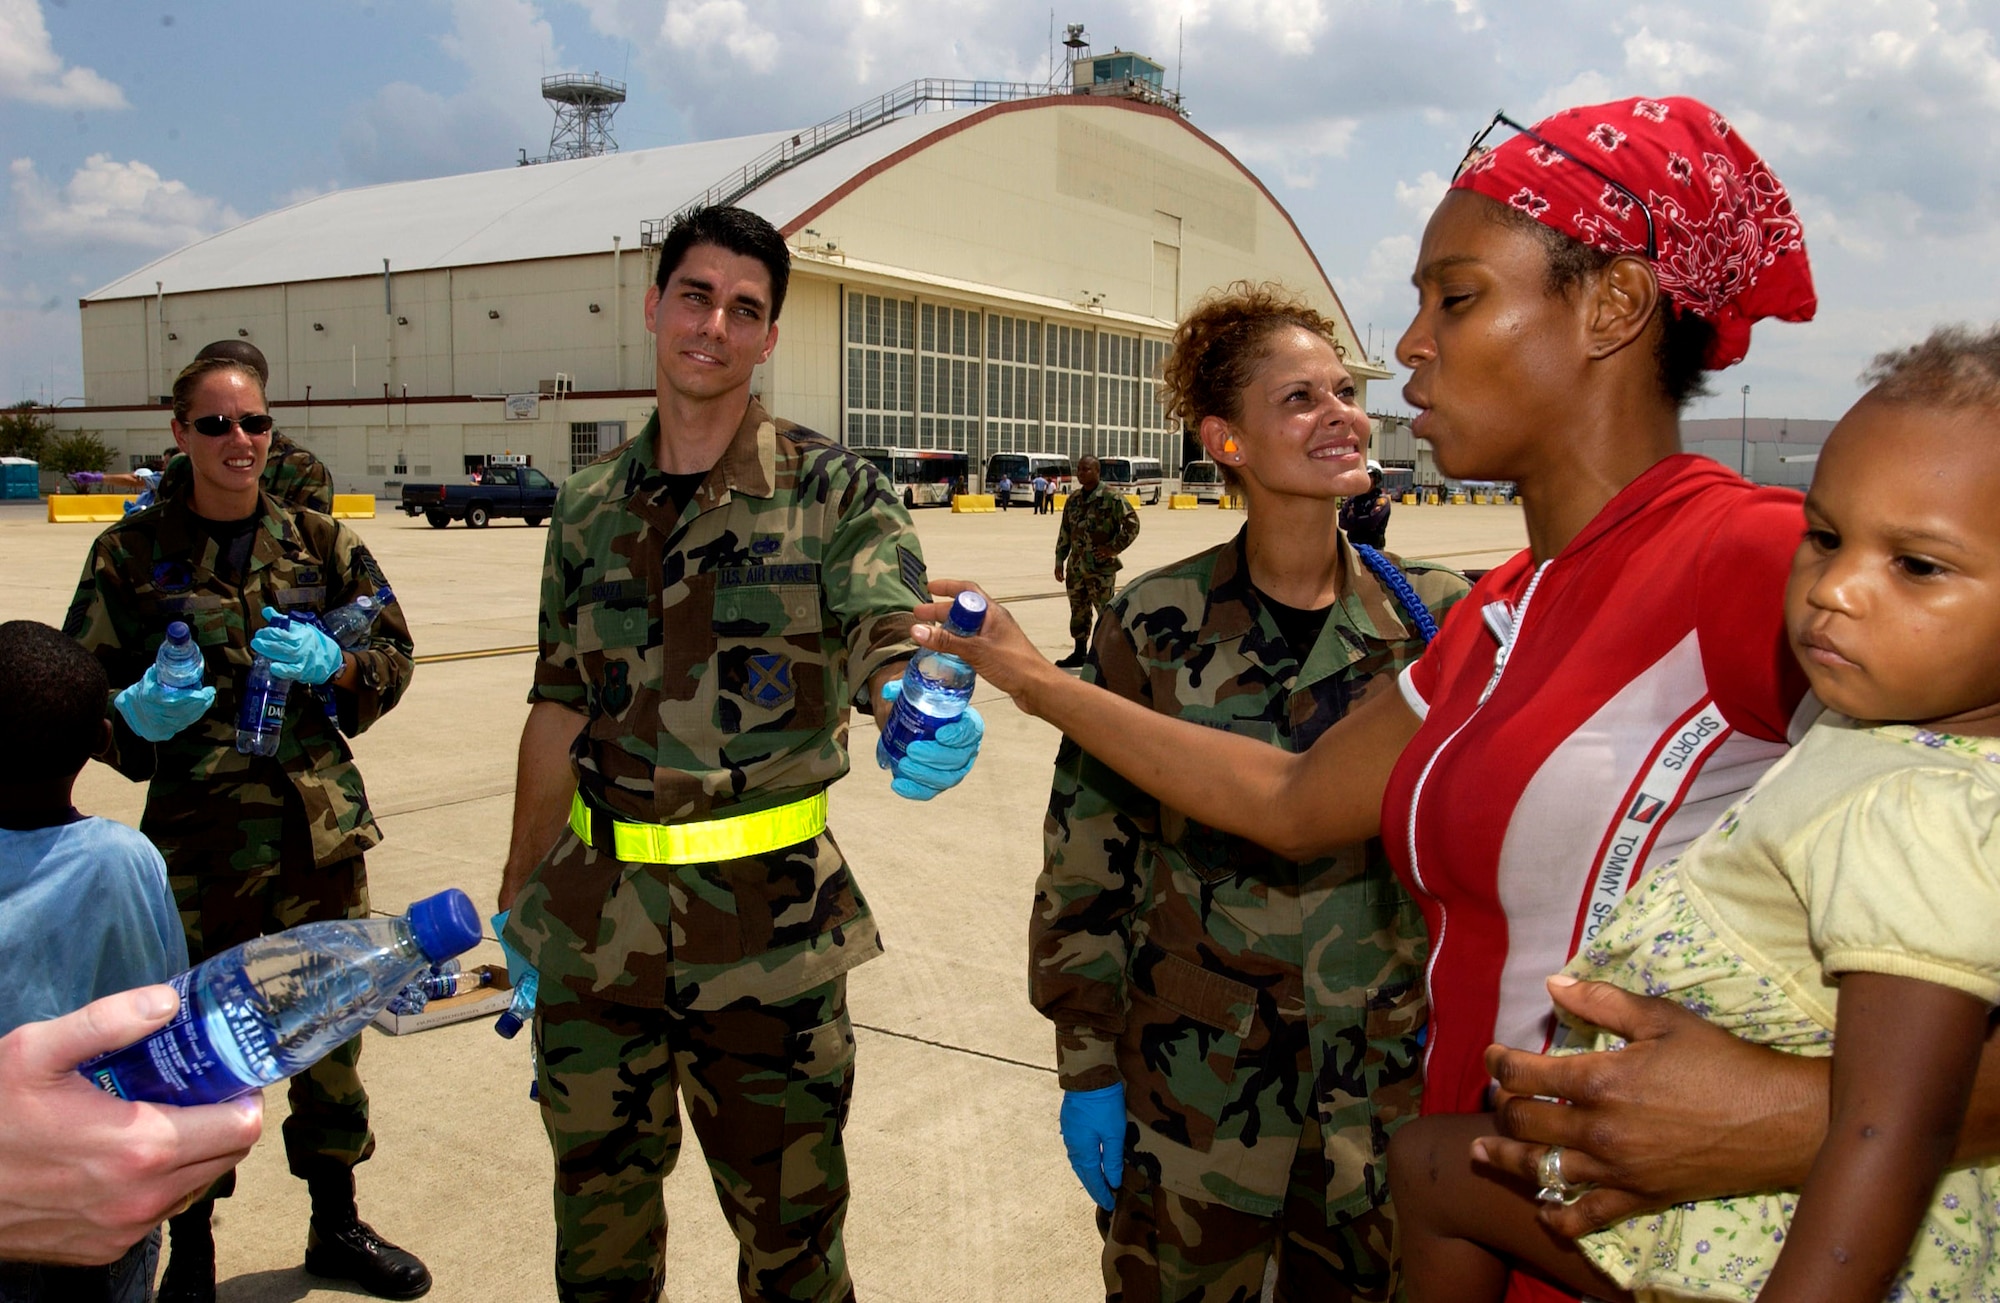 LACKLAND AIR FORCE BASE, Texas -- Staff Sgt. John Souza hands out water to Hurricane Katrina evacuees here. The evacuees arrived Sept. 2 from New Orleans. They are being inprocessed, given a medical checkup, fed and put into temporary shelters.  Sergeant Souza is assigned to the 343rd Training Squadron.  (U.S. Air Force photo by Tech. Sgt. Mark Borosch)